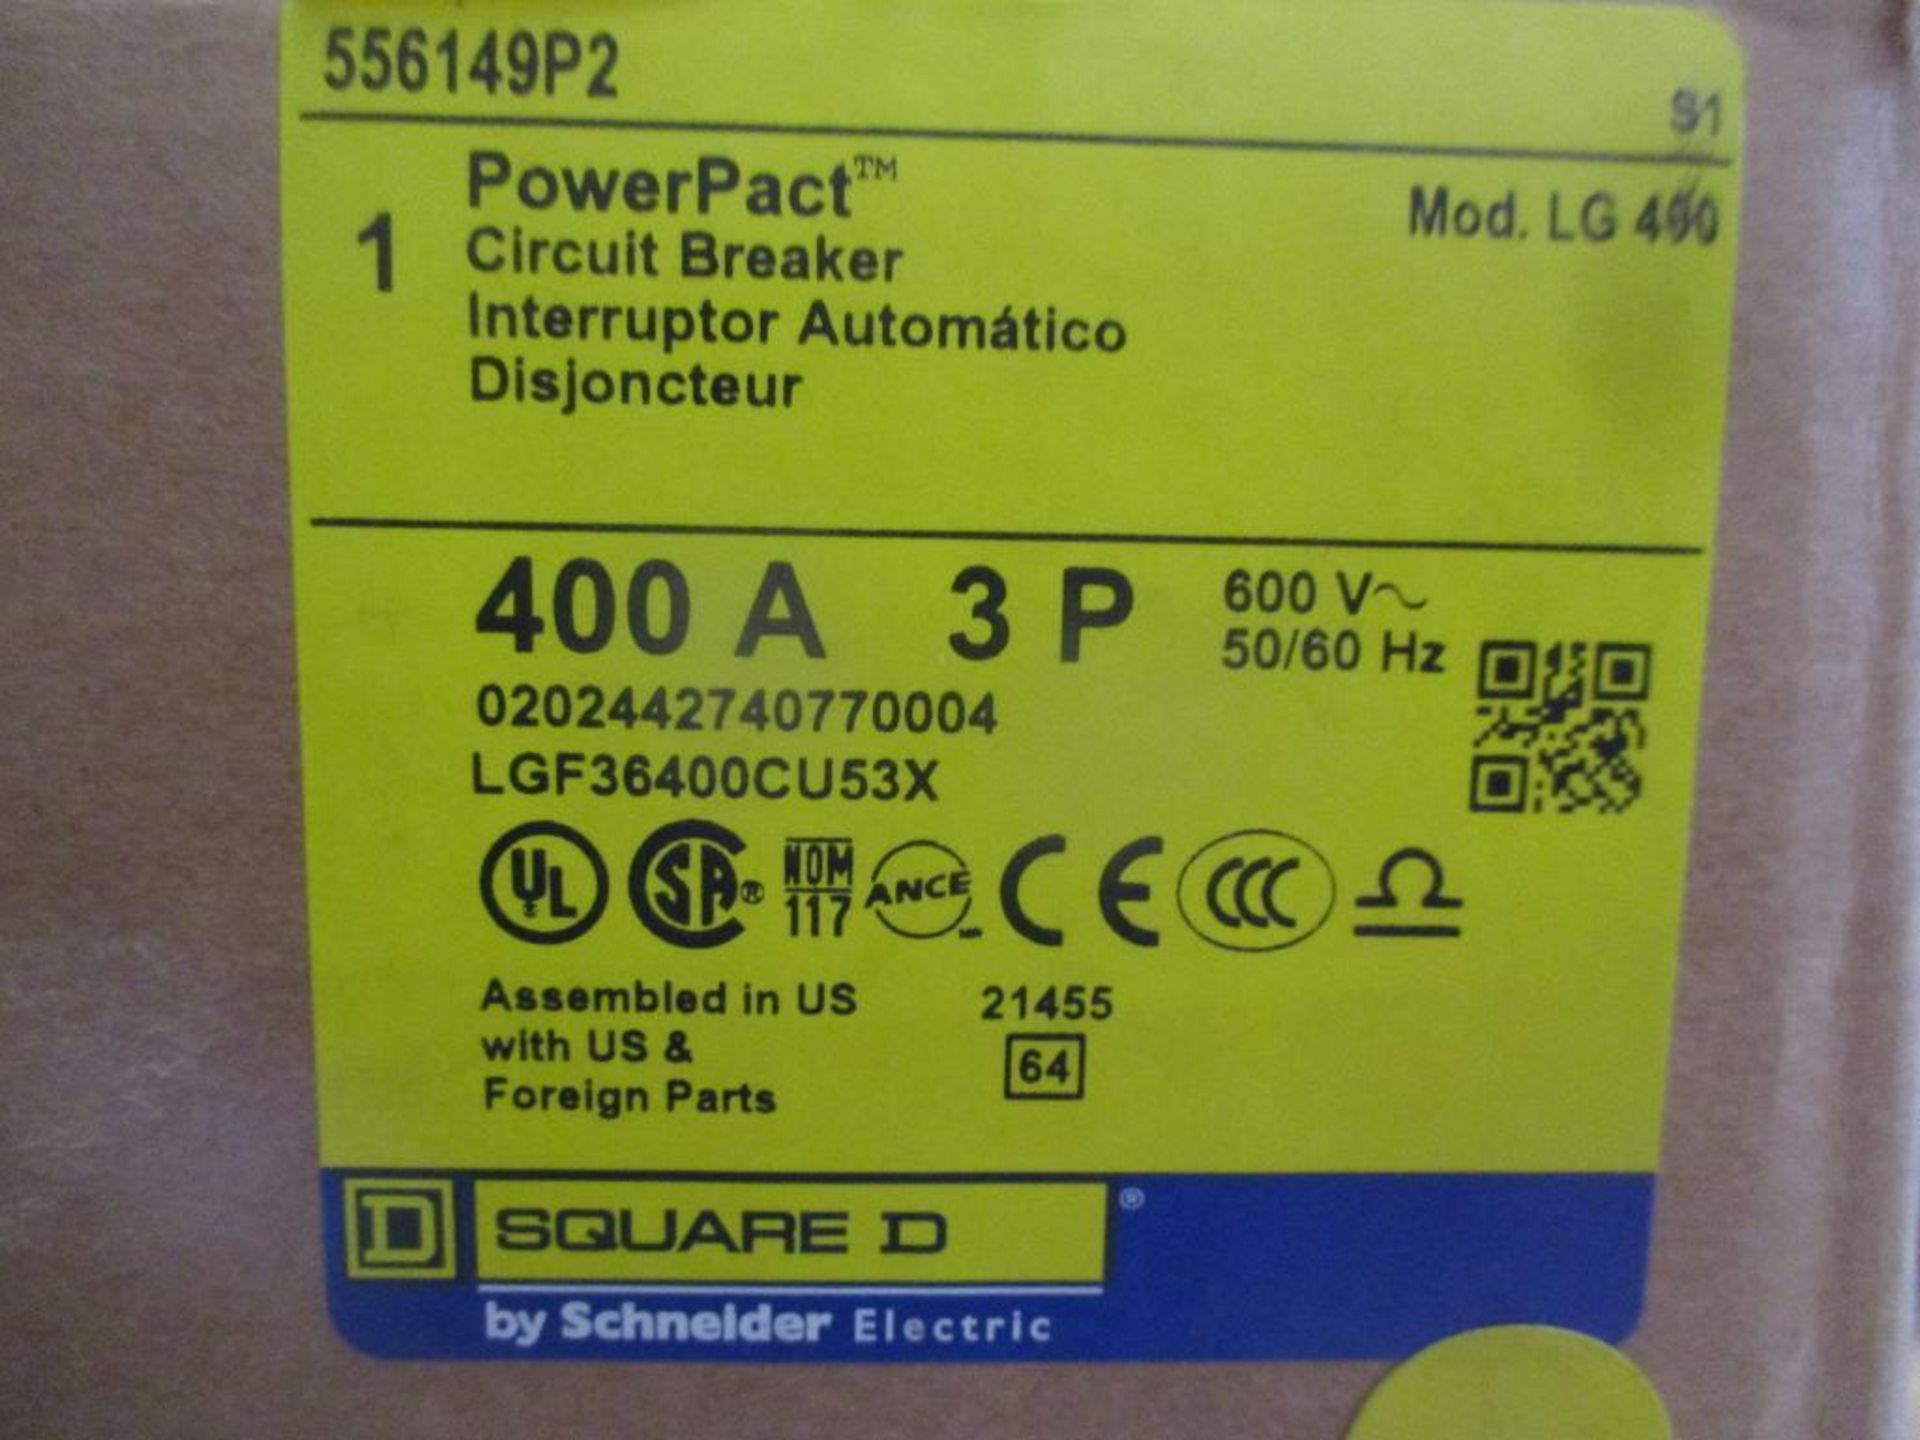 Square D 400 AMP Circuit Breaker, 556149P2, 400A, 3P, 600VAC, PowerPacT LG 400 (New in Box) - Image 4 of 4